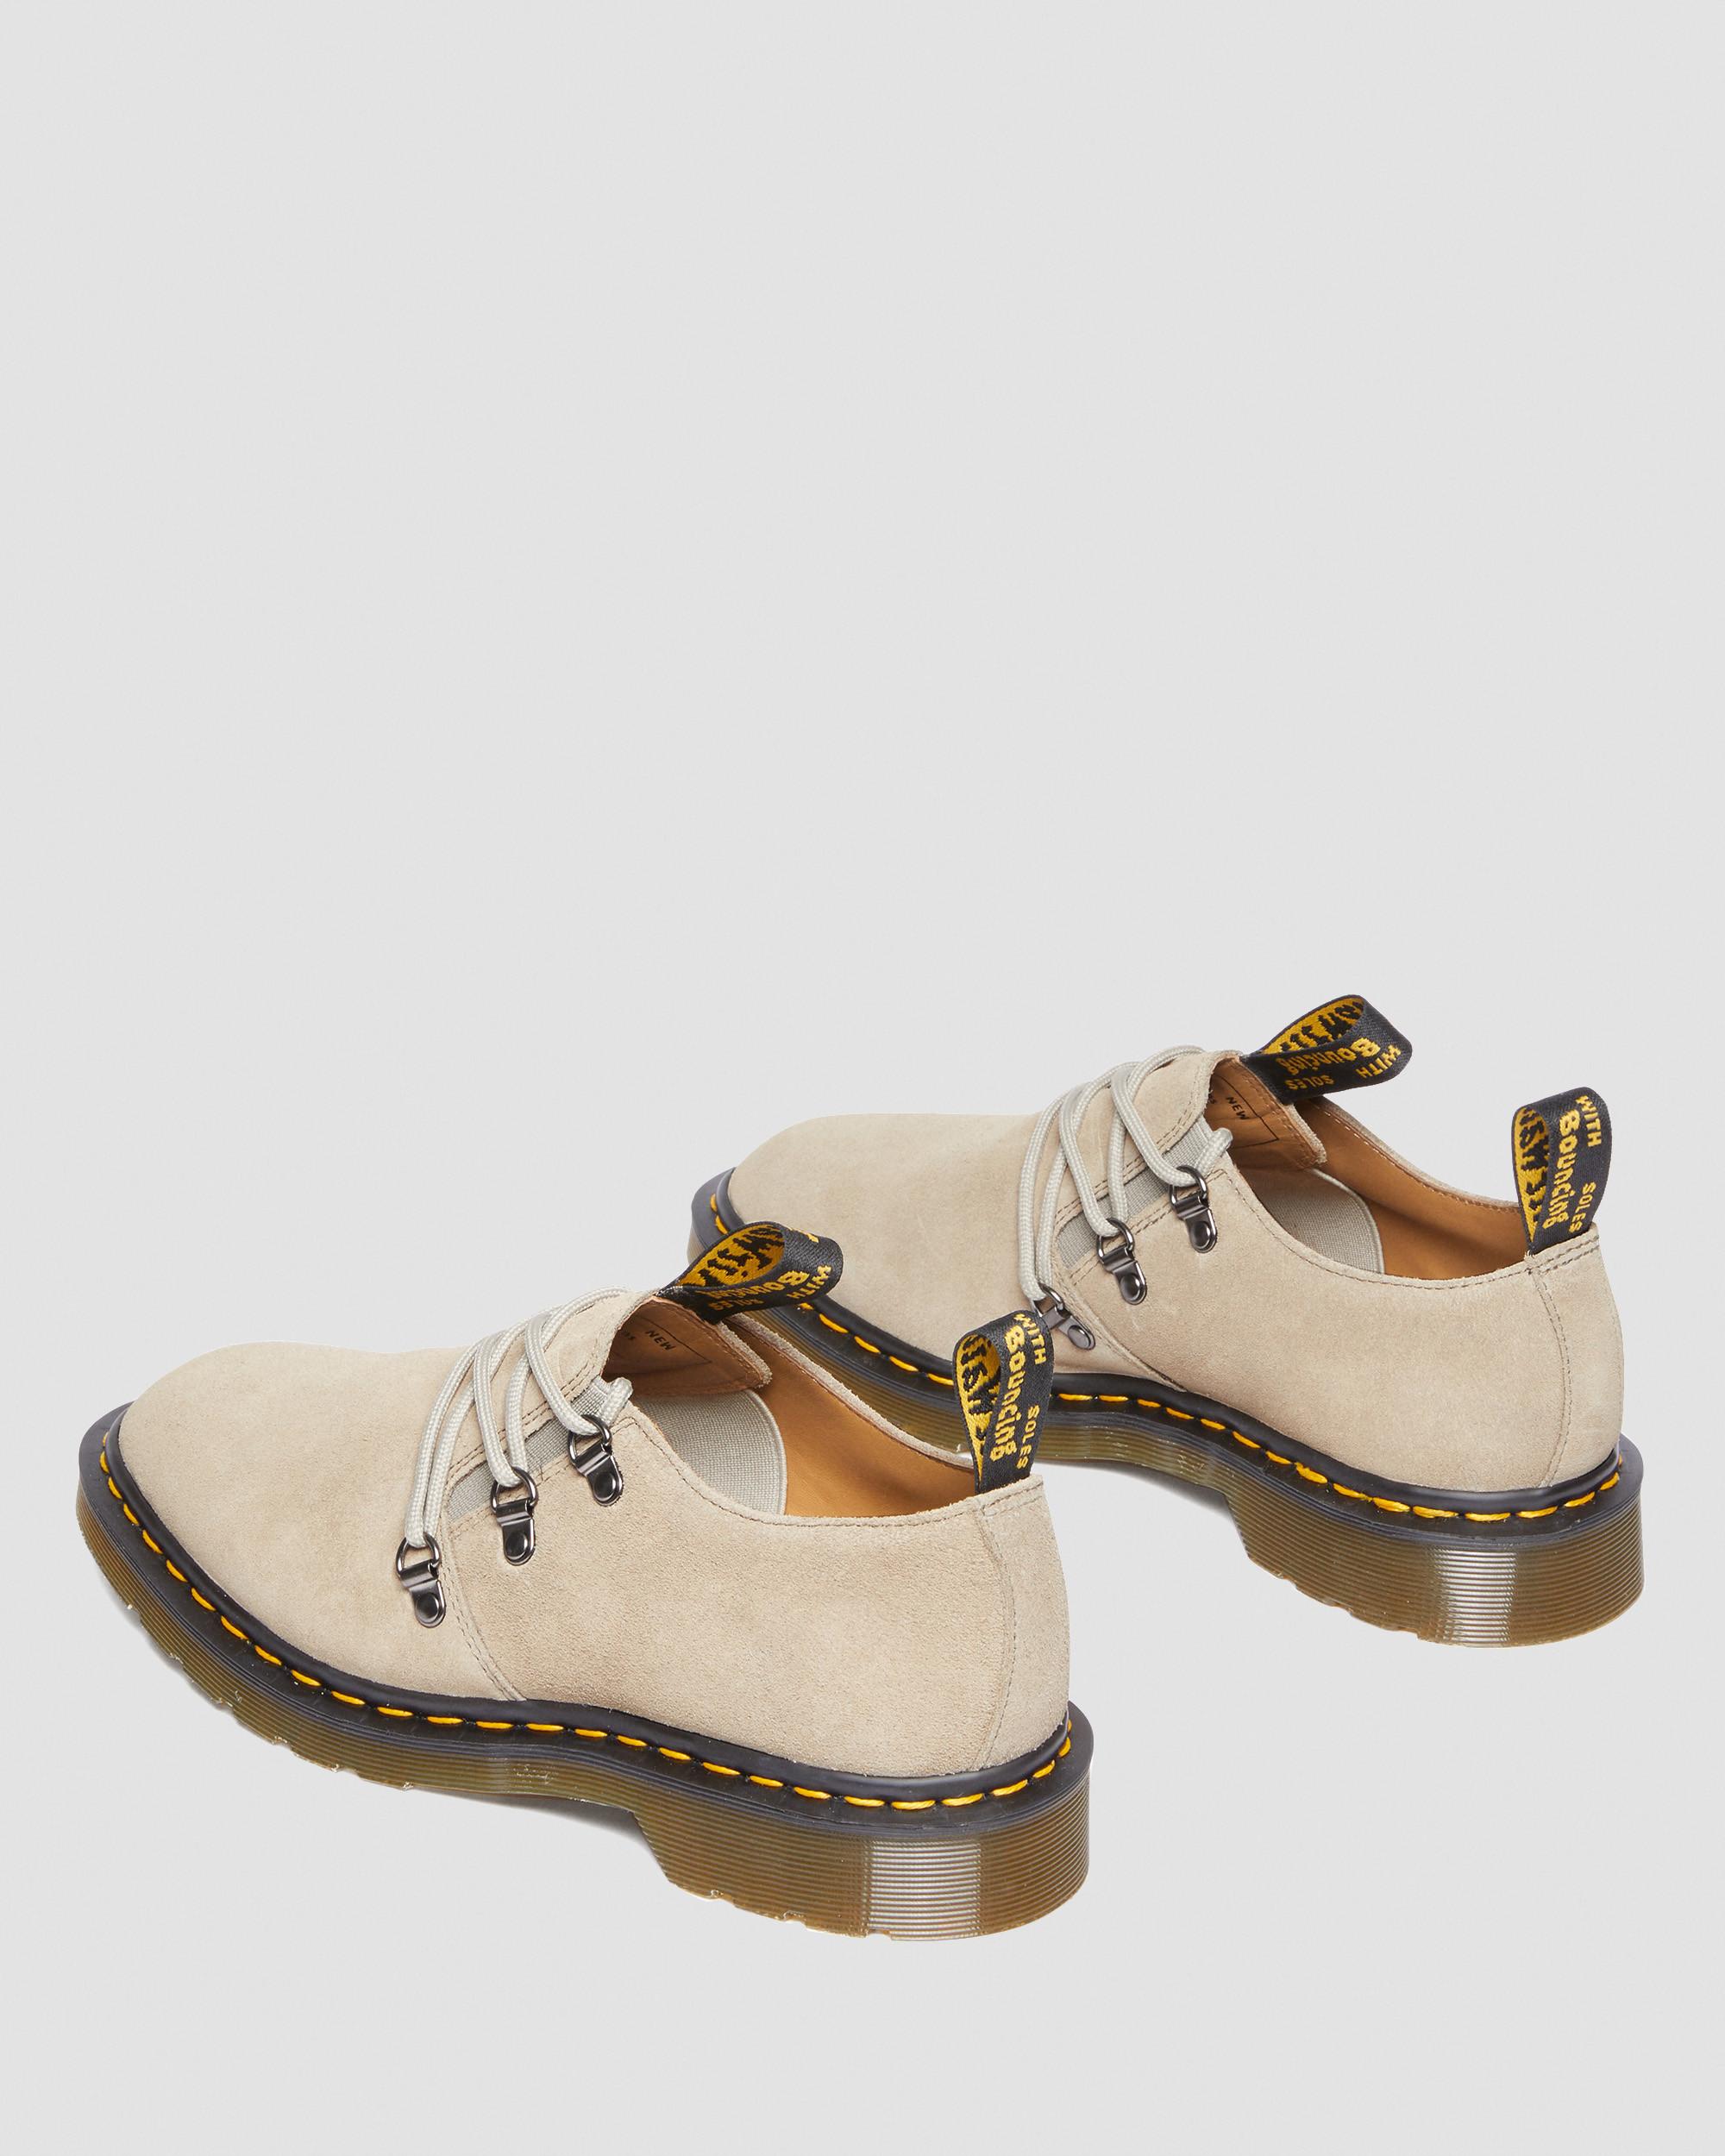 1461 Engineered Garments Suede Oxford Shoes1461 Engineered Garments Suede Oxford Shoes   Dr. Martens